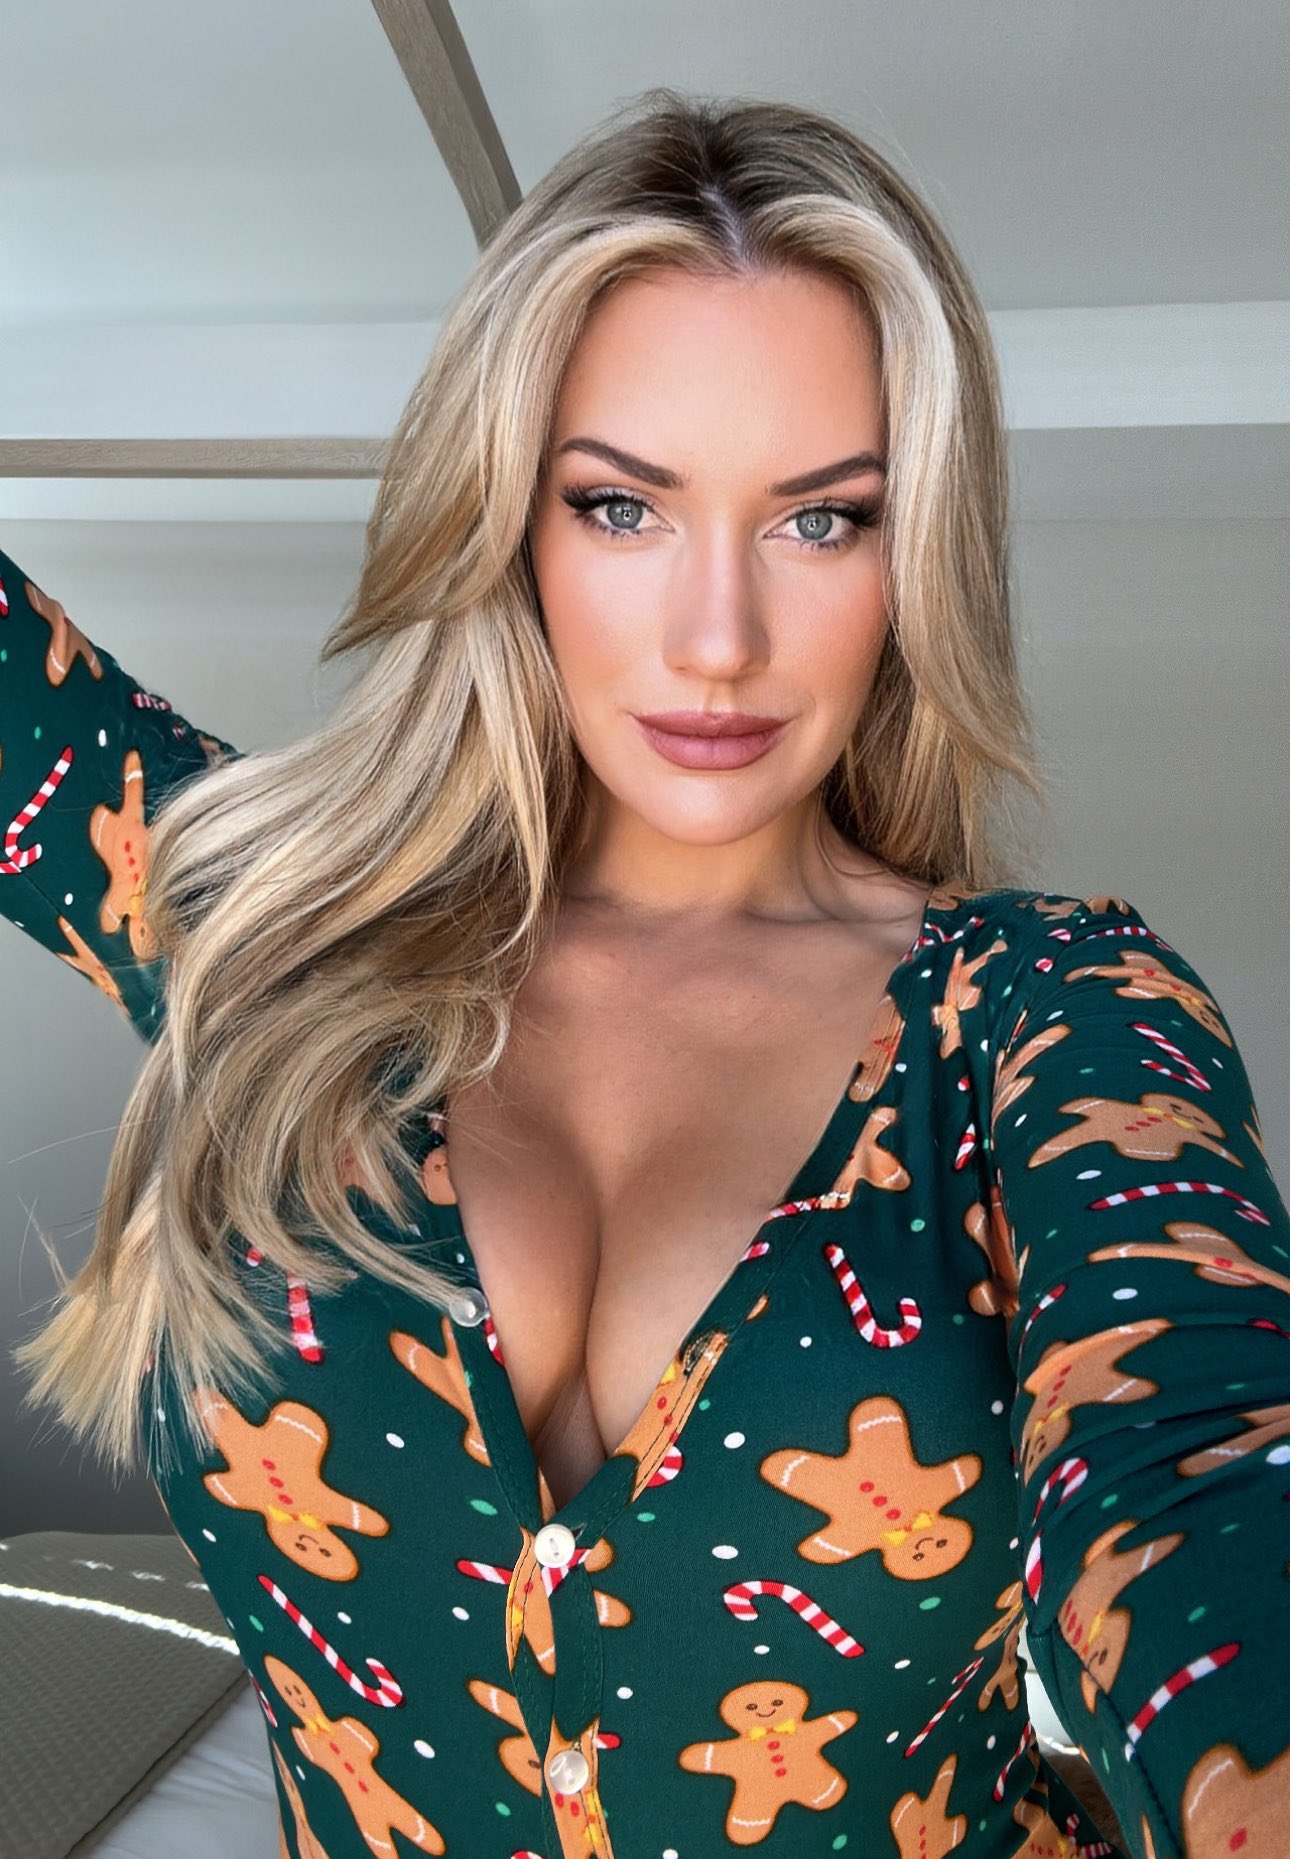 Paige Spiranac Wants to Know if You Pull Out! - Photo 39